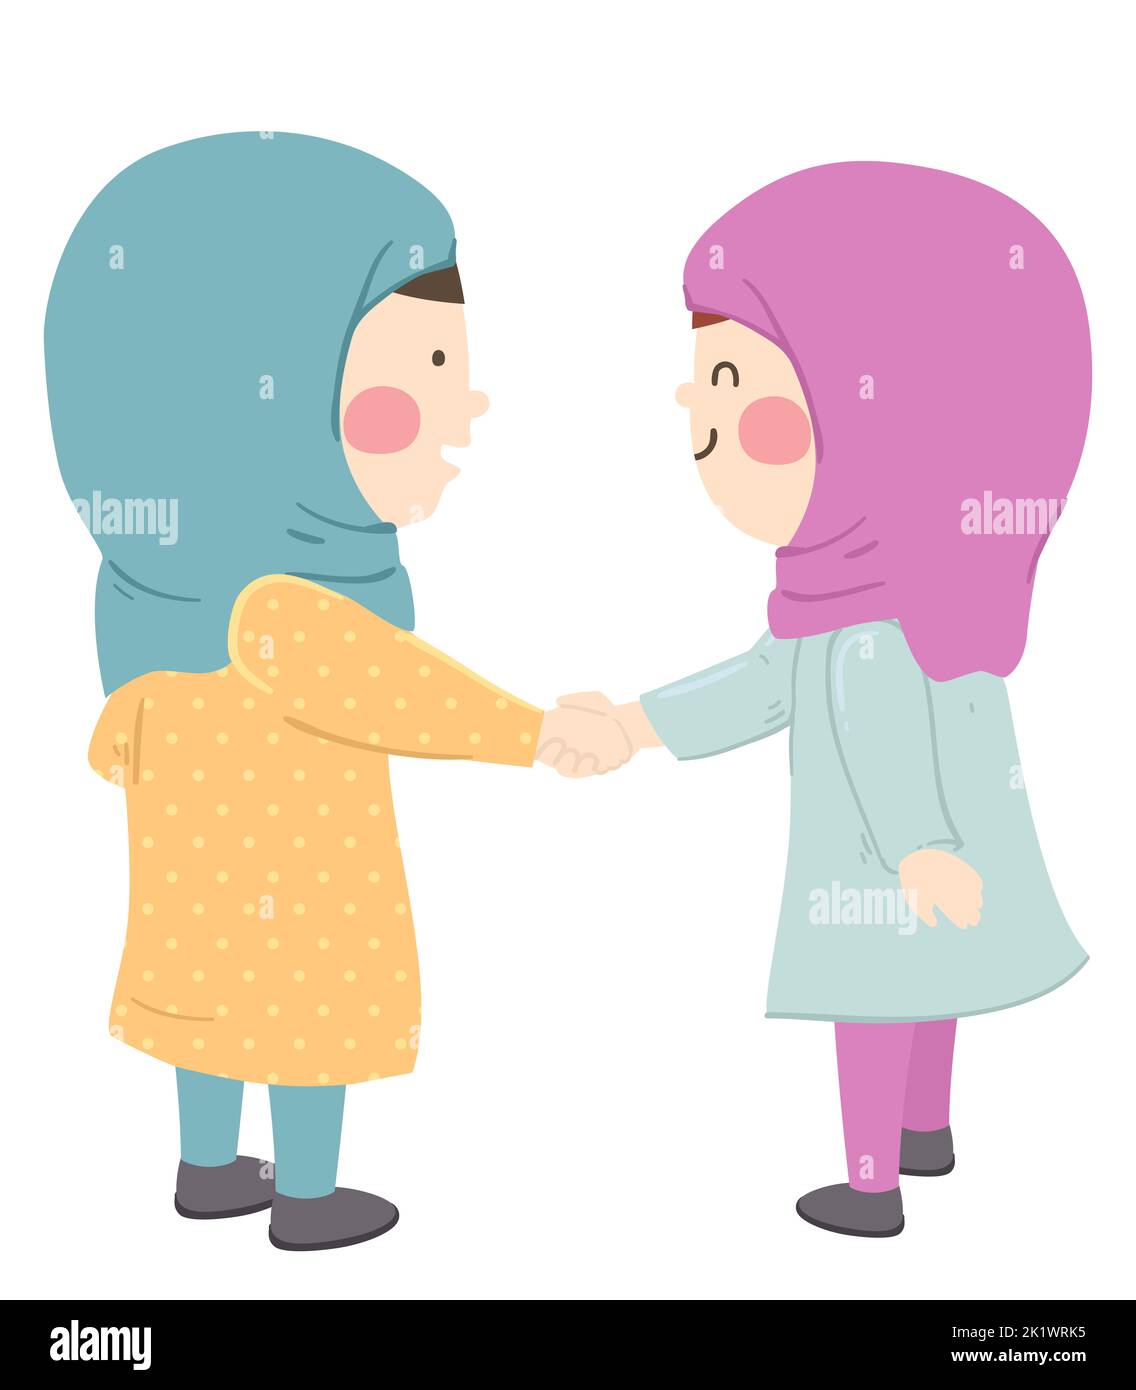 Illustration of Kids Girls Wearing Hijab and Shaking Their Hands Stock Photo